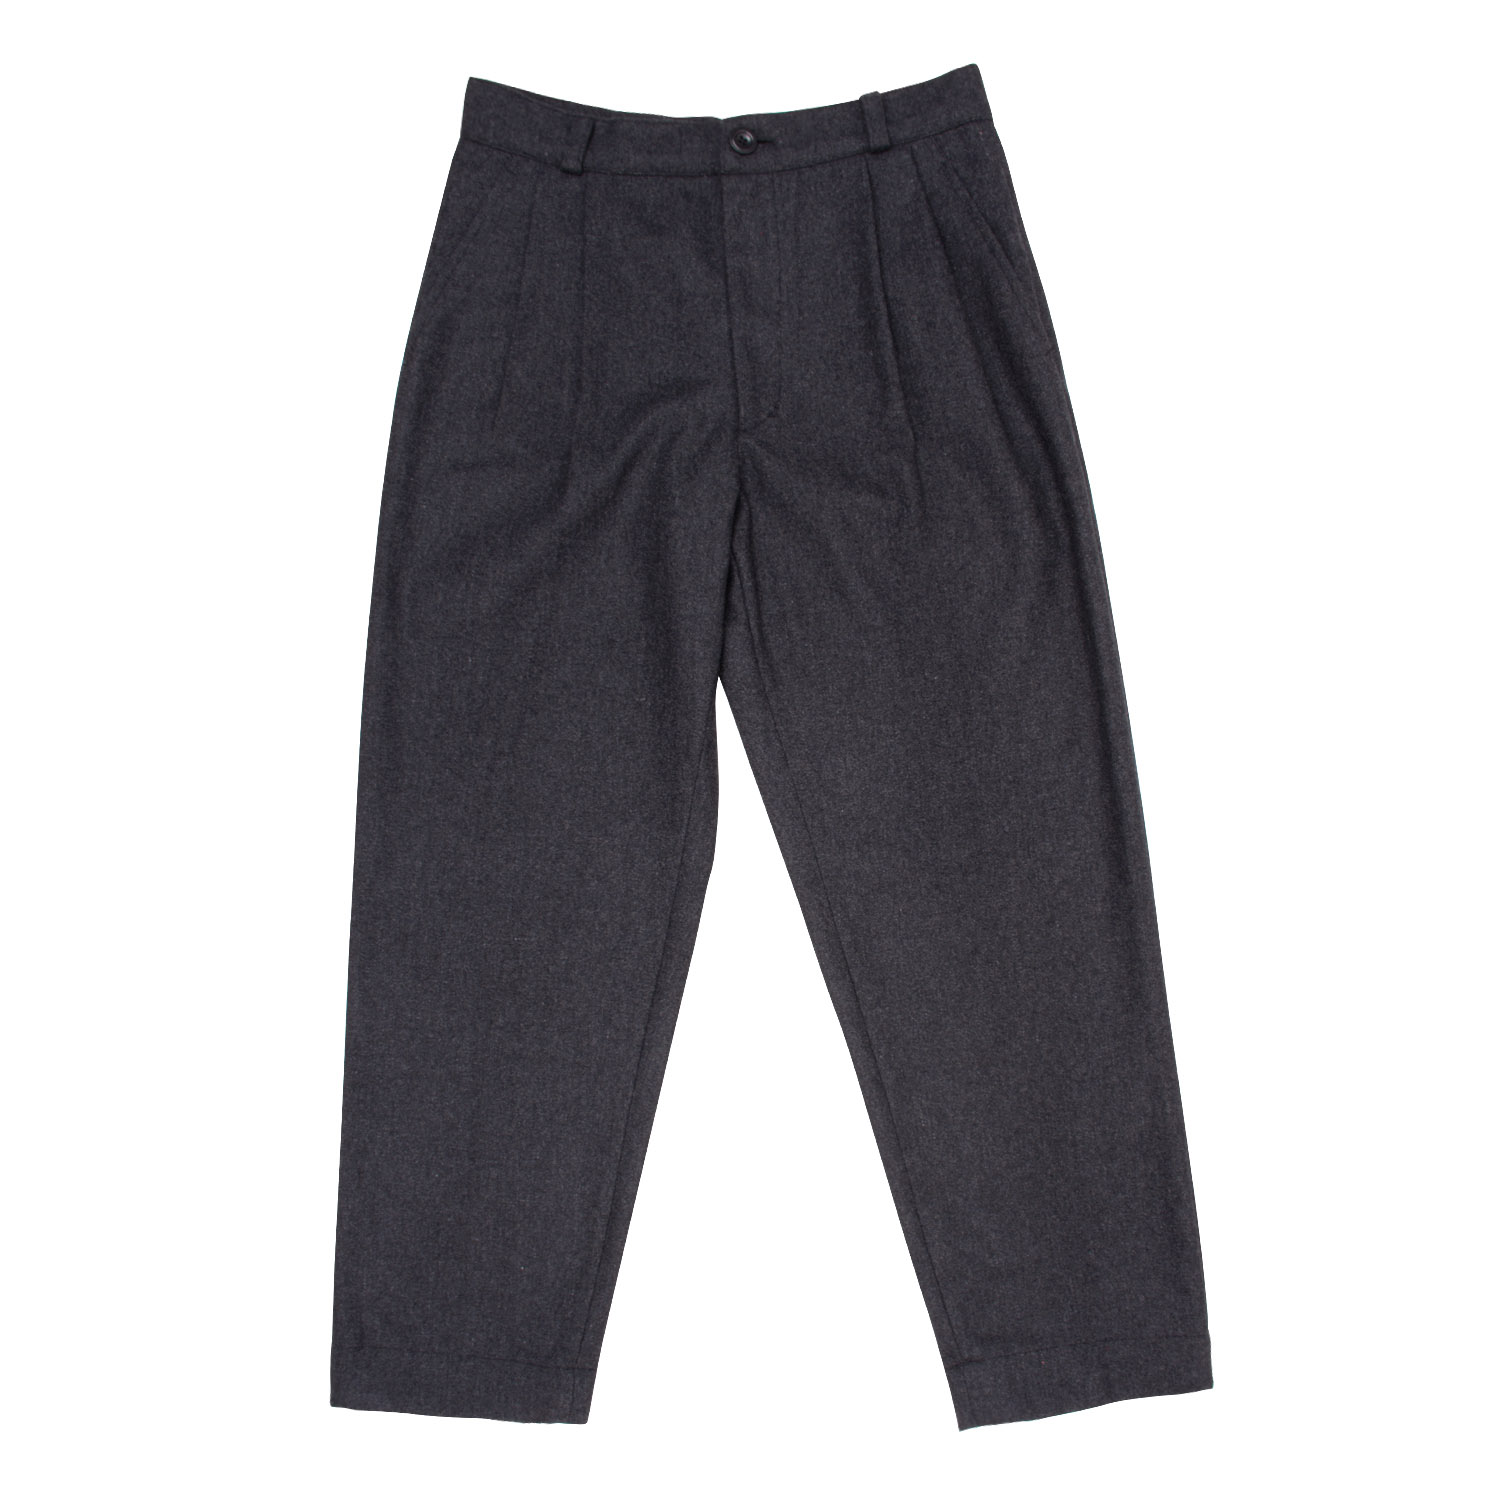 CobblerII | Unisex pleated trousers by Lanefortyfive